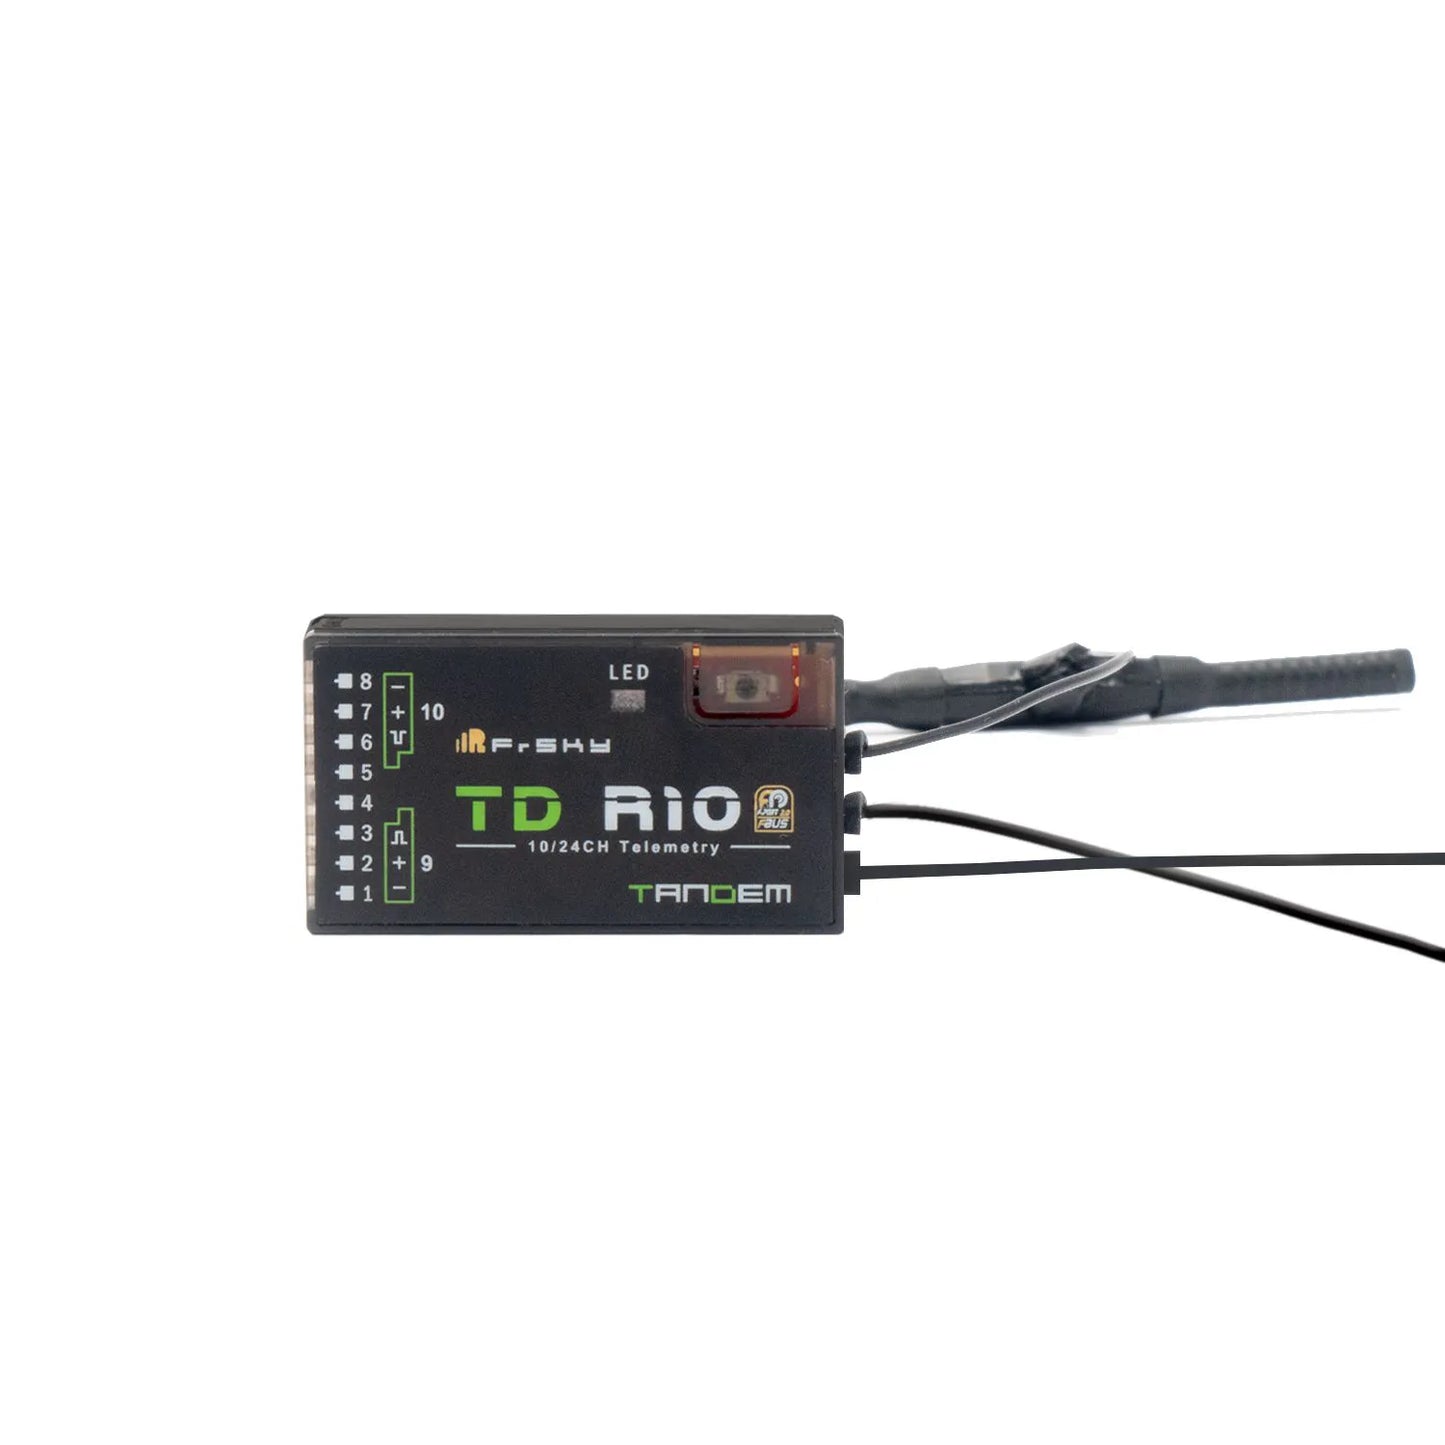 FrSky TD R10 Receiver, LED 10 FrSAY Td Rio 10/24ch Telemetry 2 TAND